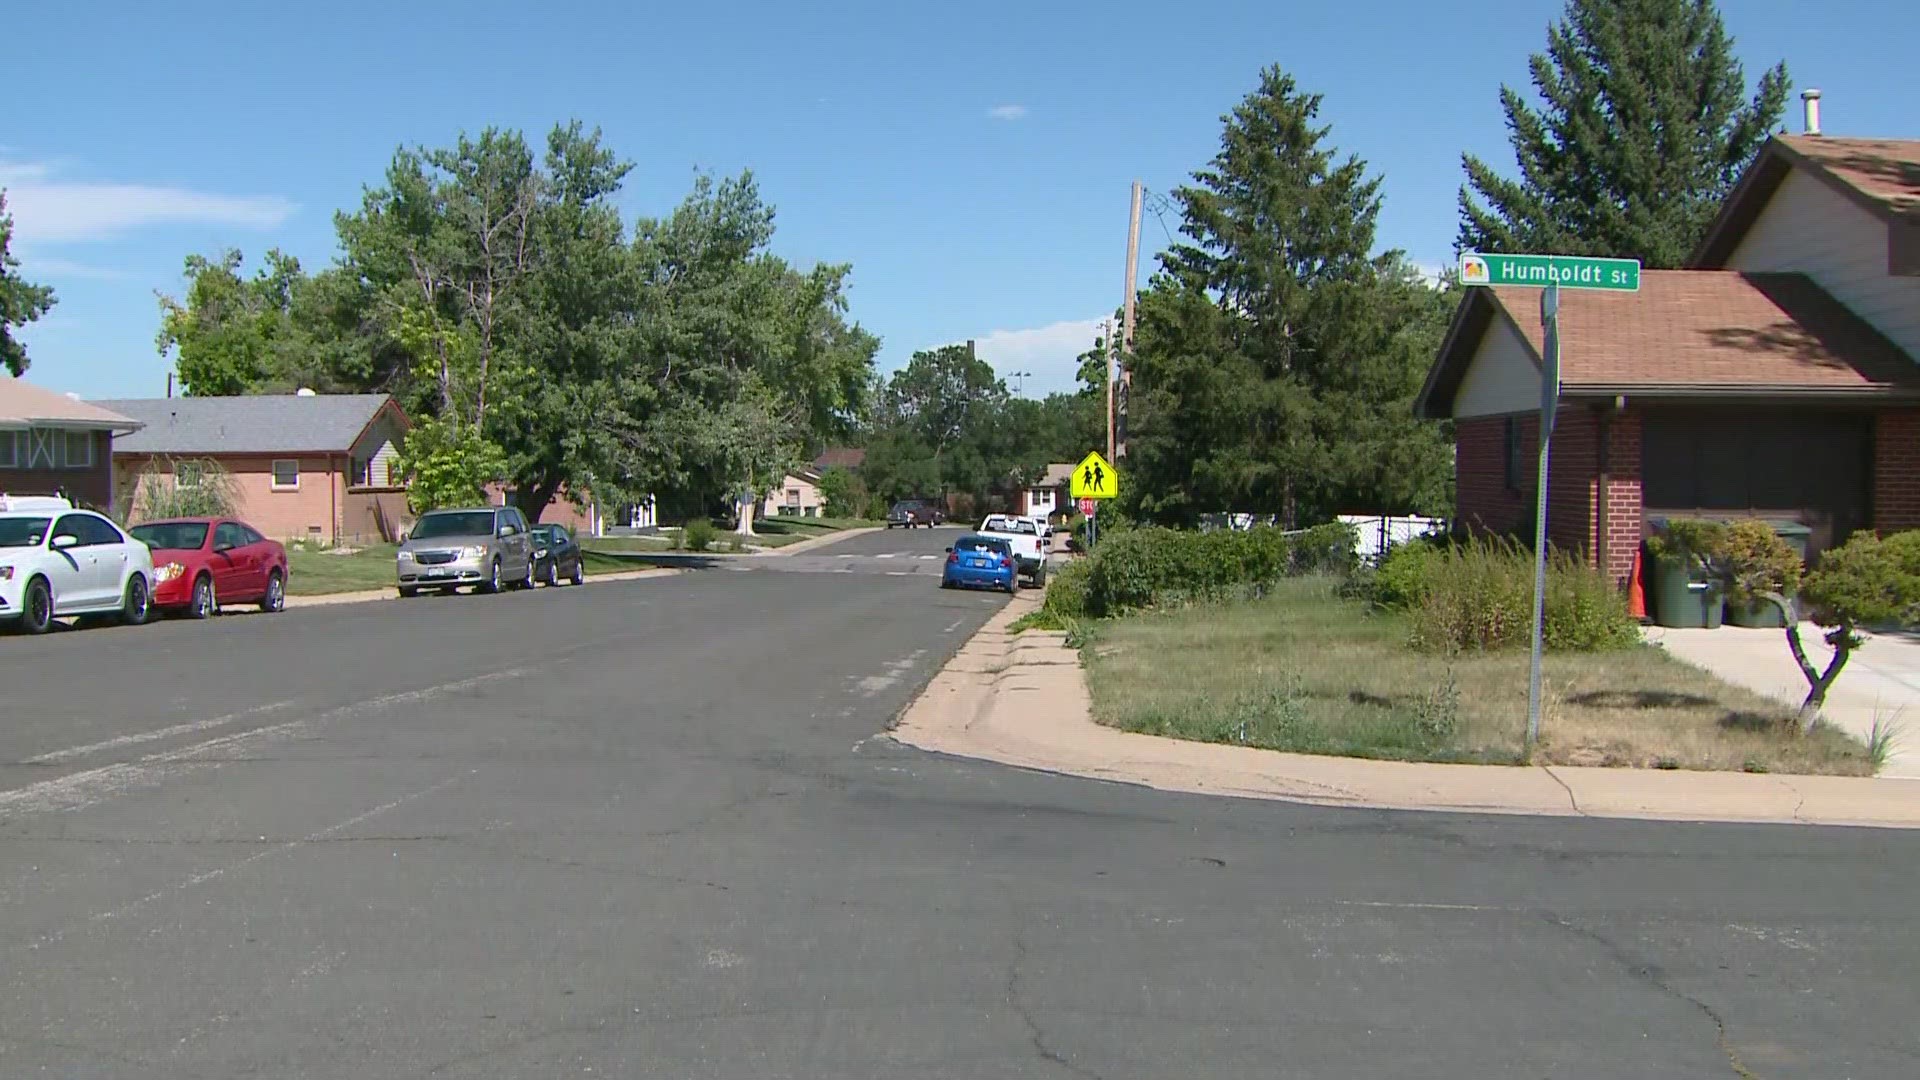 Northglenn Police said the suspect is expected to survive after the shooting in the area of Fowler Drive and Humboldt Street early Saturday morning.